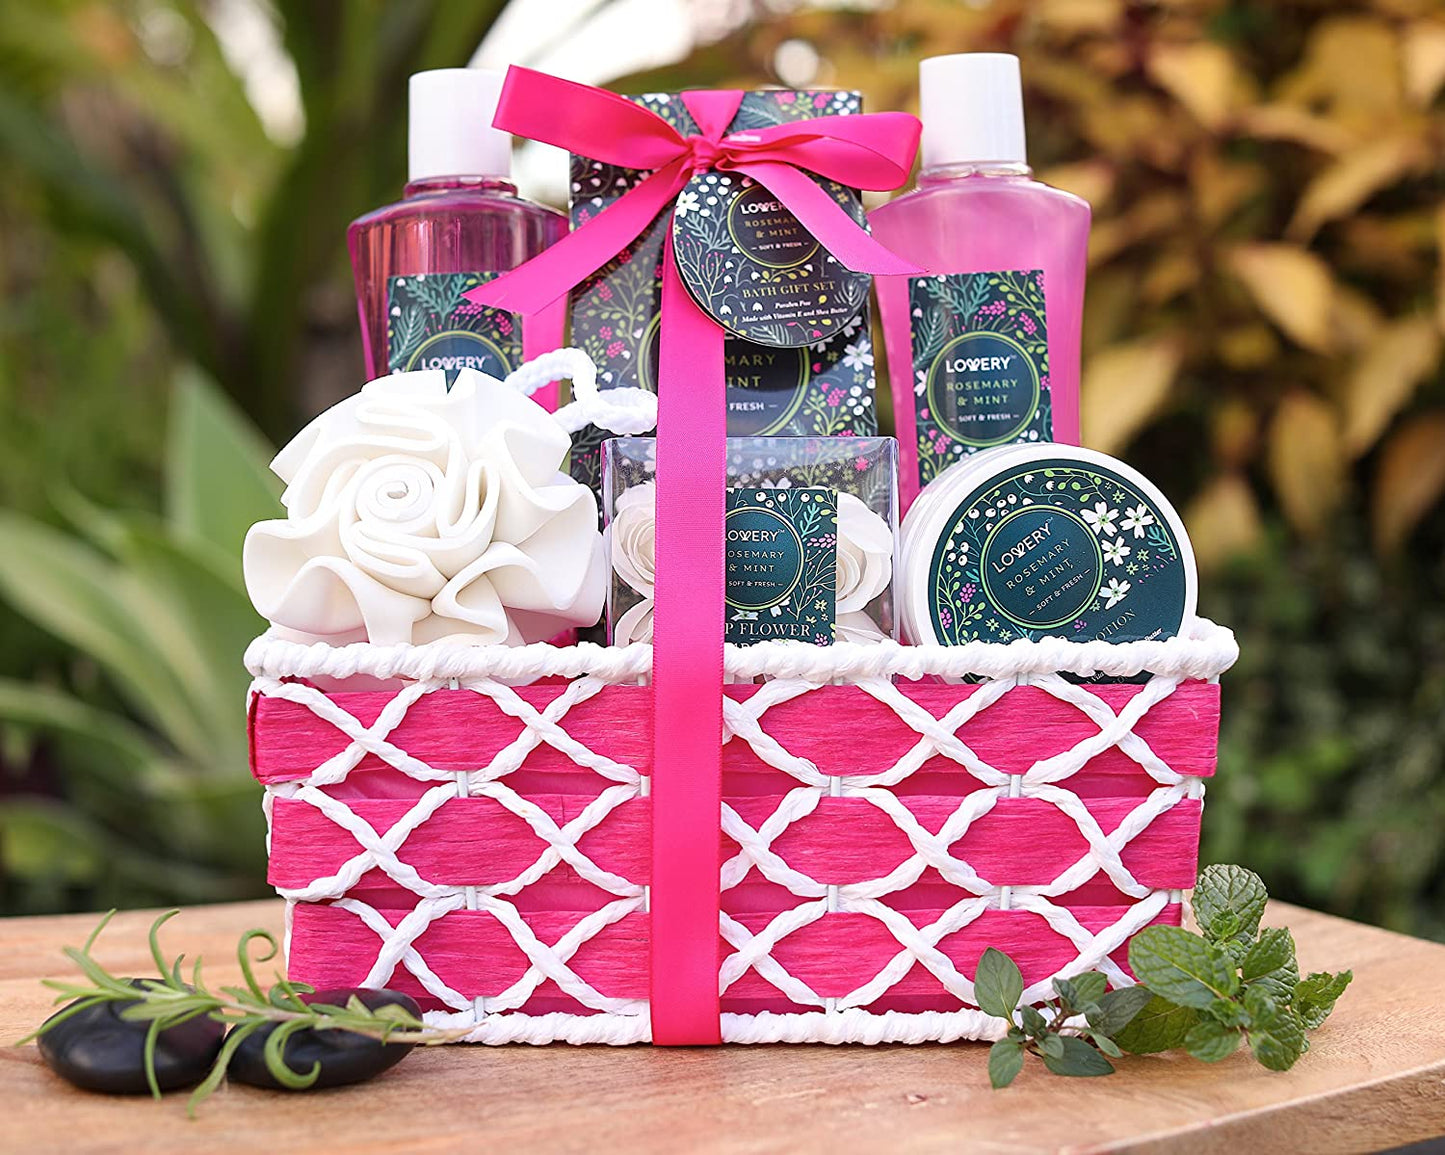 Rosemary and Mint Gift Set  - 9Pc Home Spa Kit